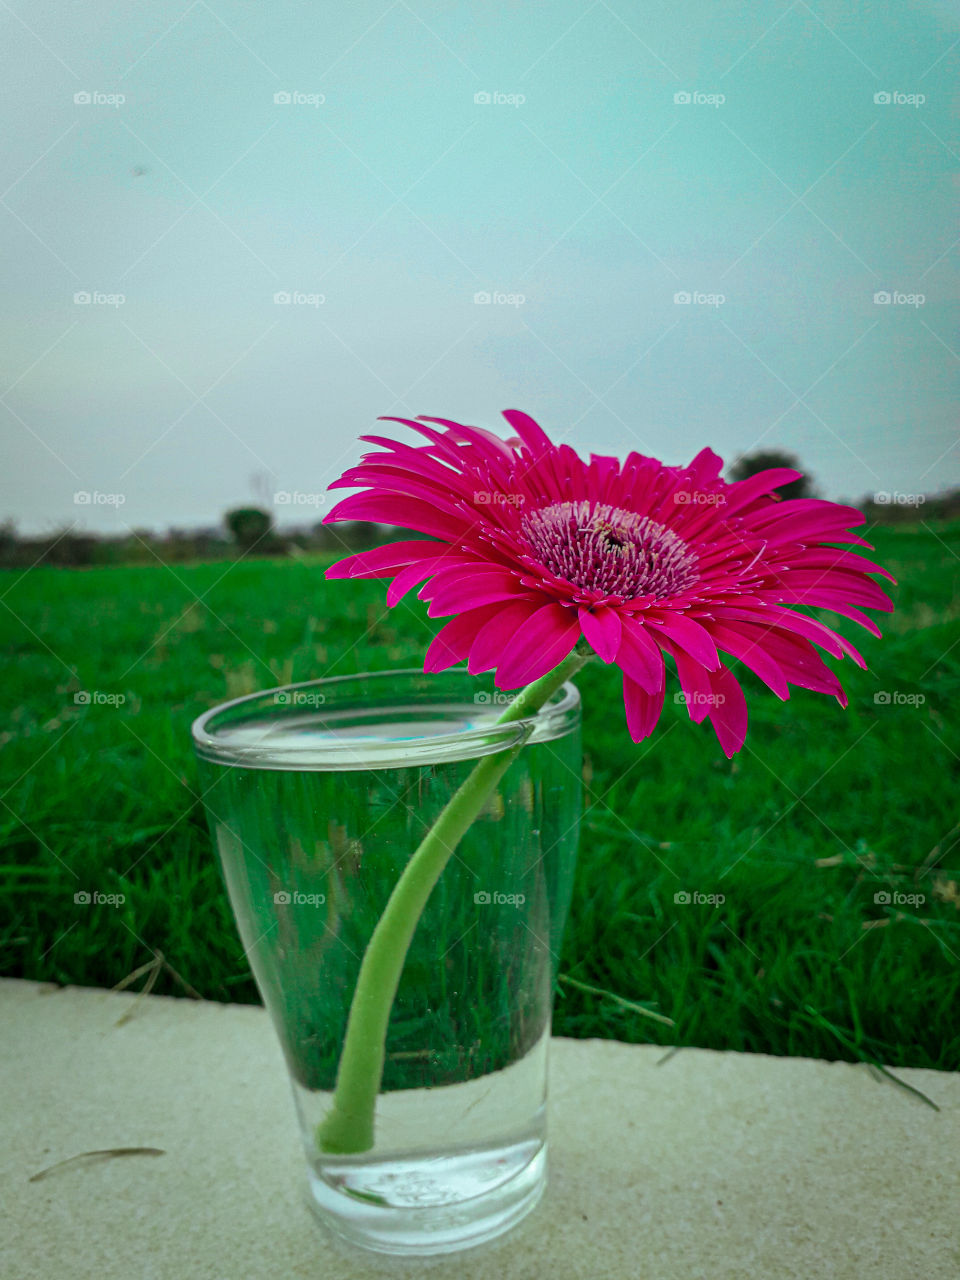 Gerbera Flower
Width:3096
Height:4128
File size:5.07MB
Aperture:1.851999
ISO:40
Time:05-July-2019/ 4:53:56pm